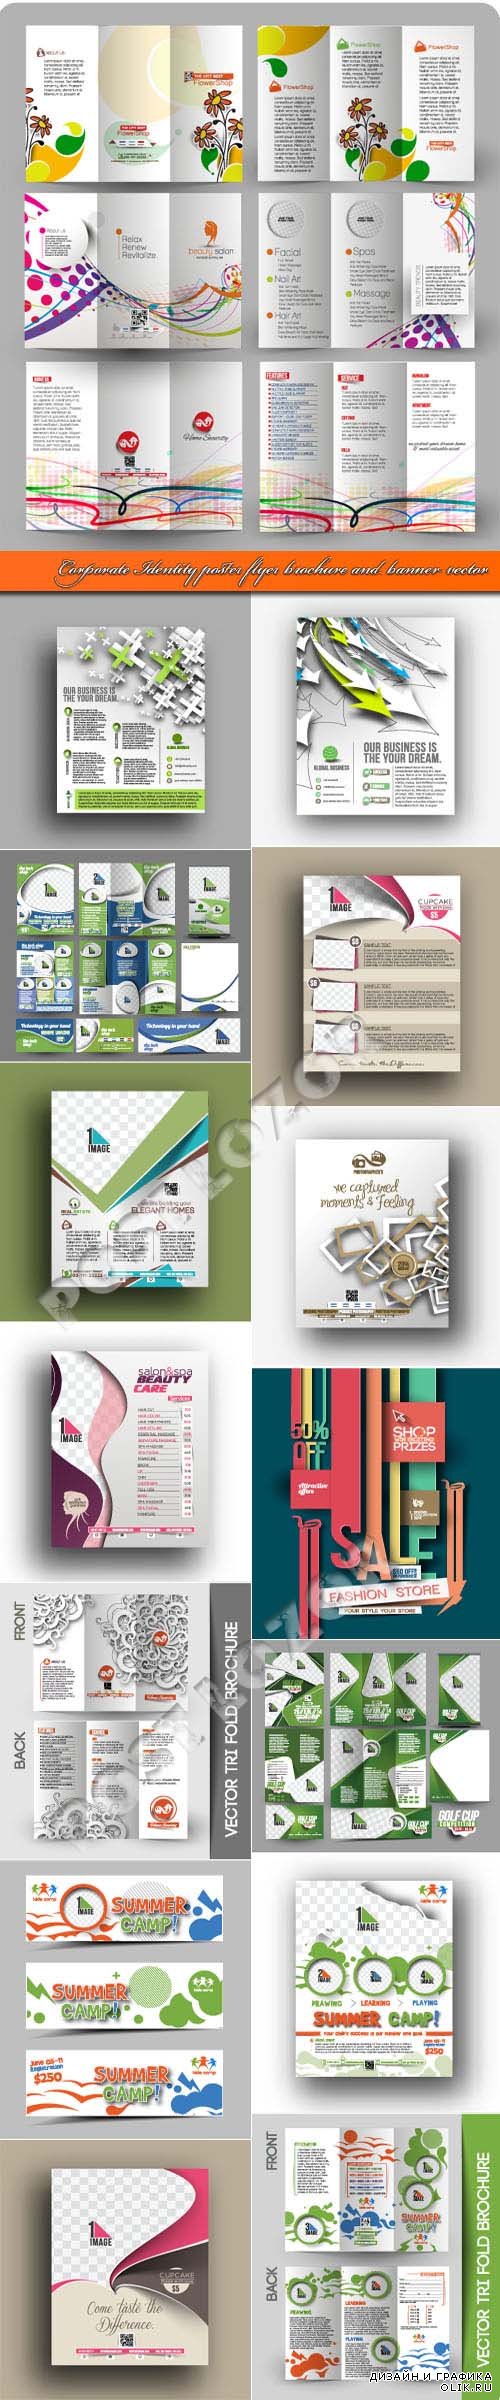 Corporate Identity poster flyer brochure and banner vector